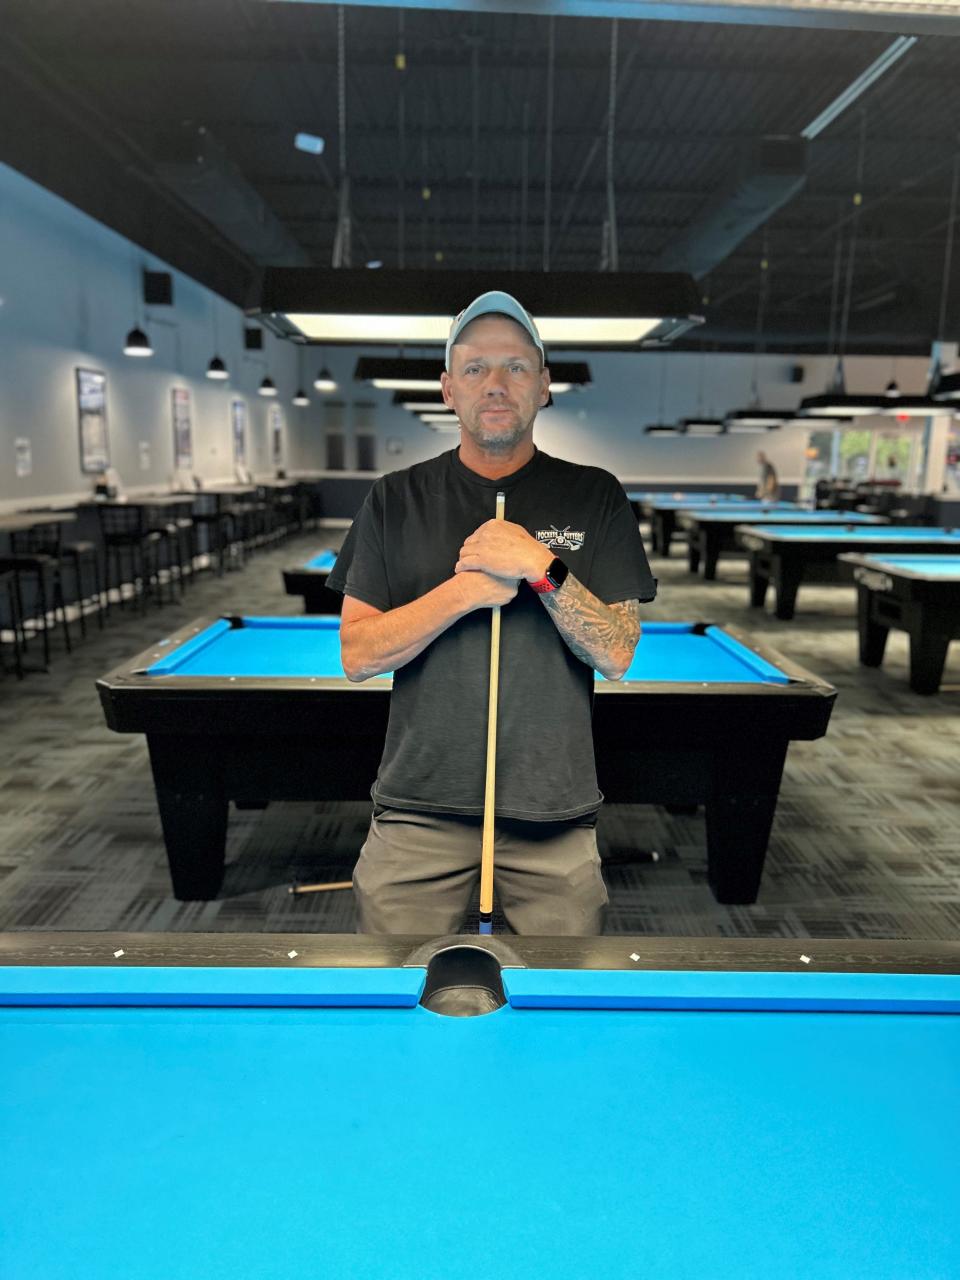 Sonny Barrett opened Pockets & Putters, a family entertainment center with 16 pool tables and a golf simulator, on Barton Boulevard in Rockledge.